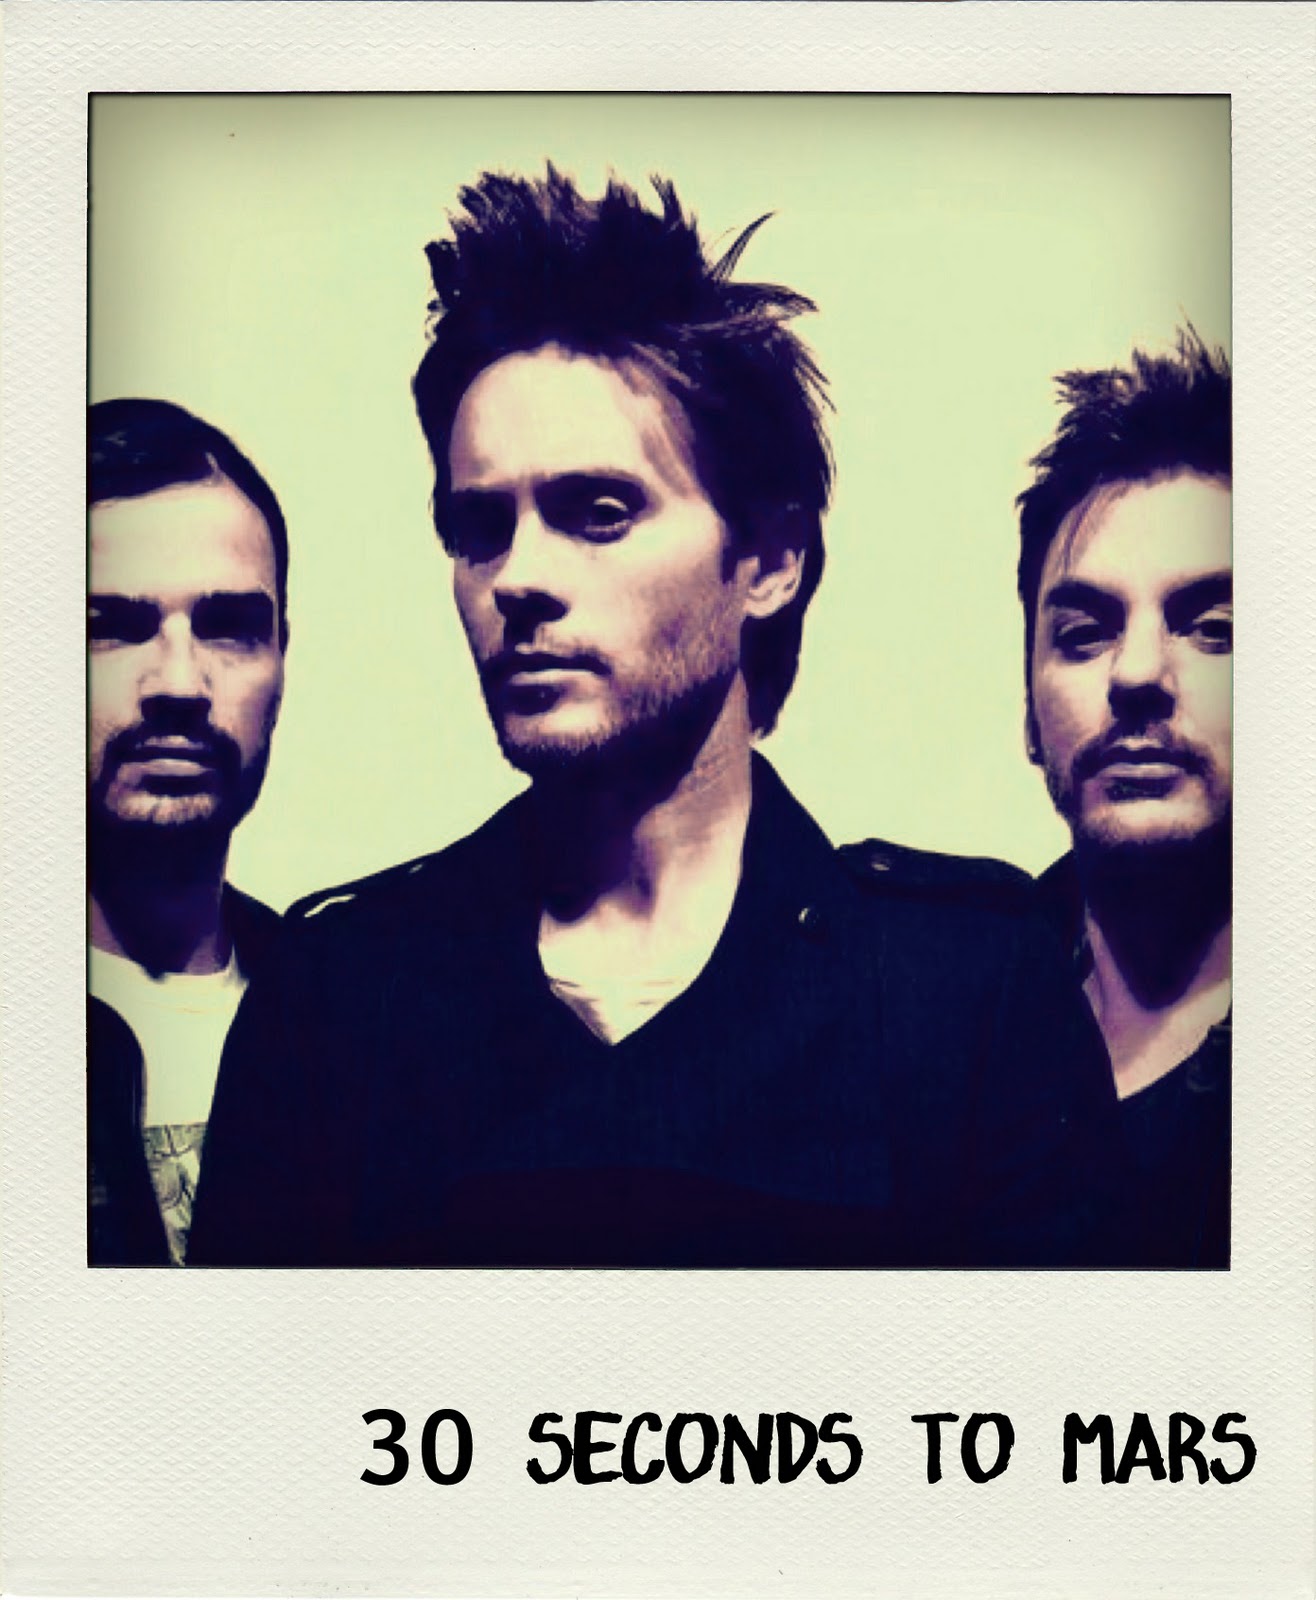 30 seconds to mars this is war album flac